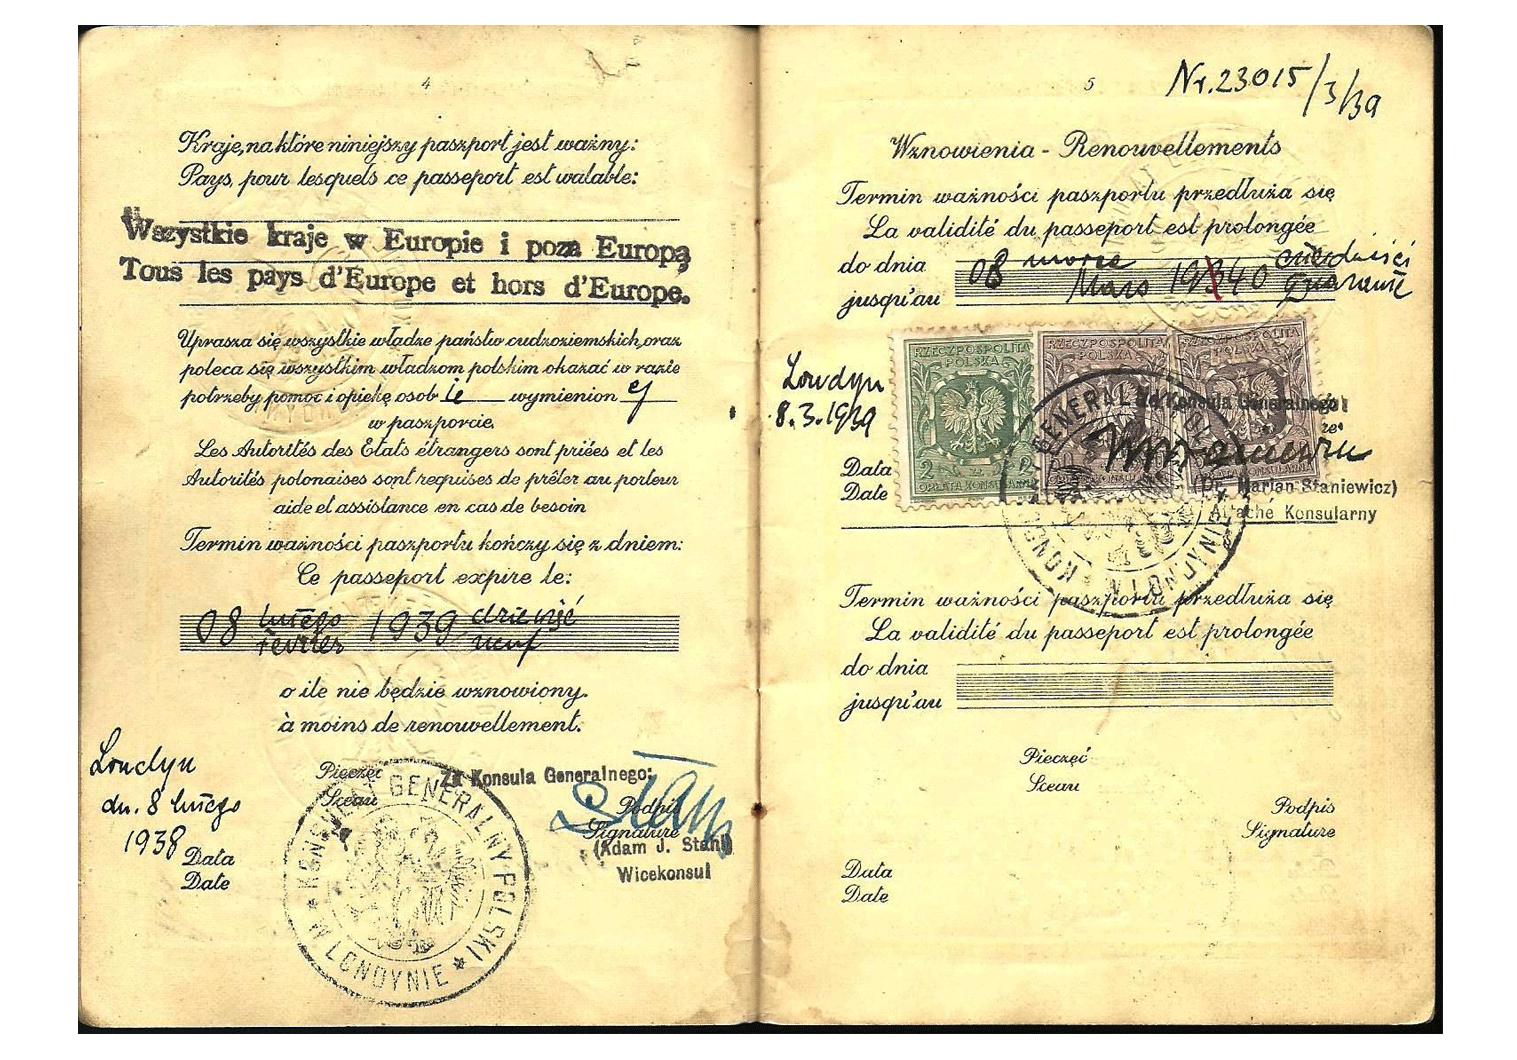 Moving from West to East in 1940 - Our Passports